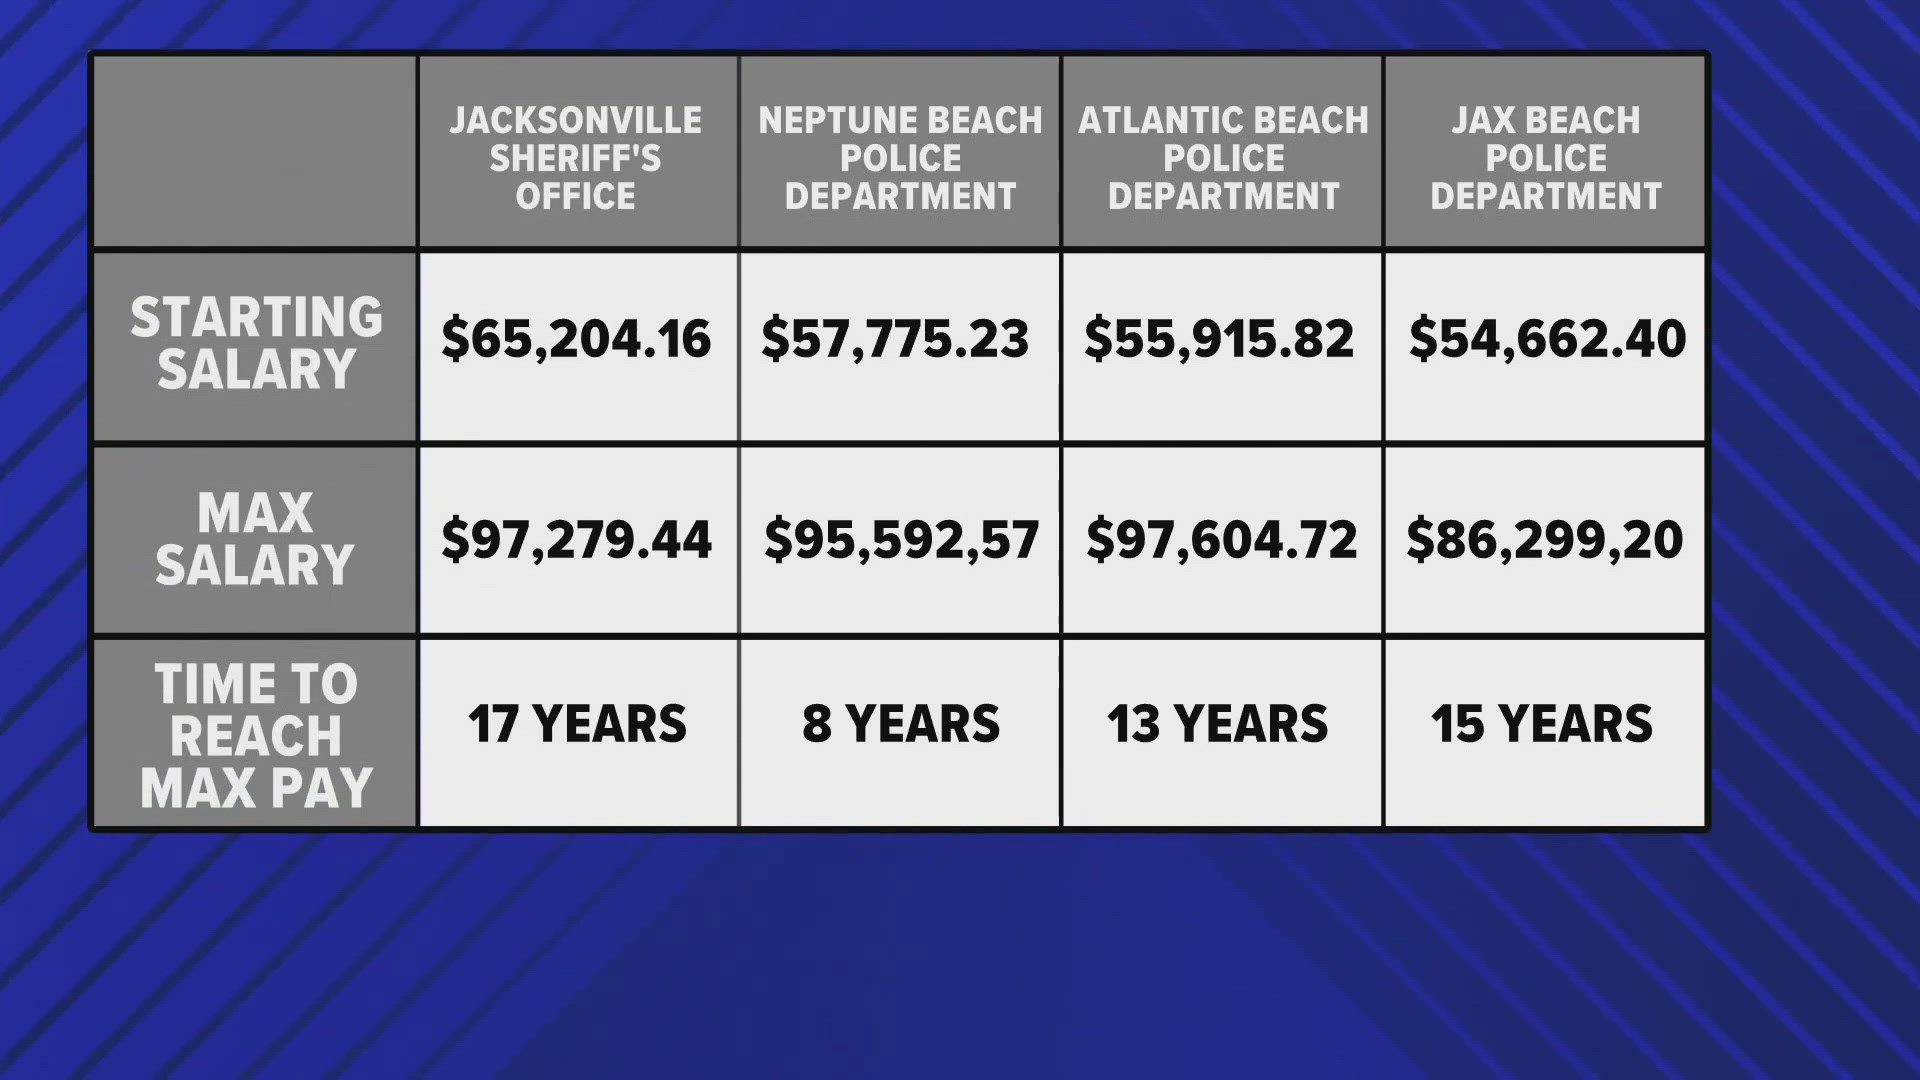 Jacksonville Sheriff's Office competitive starting salary is making it harder for beach departments to recruit officers.